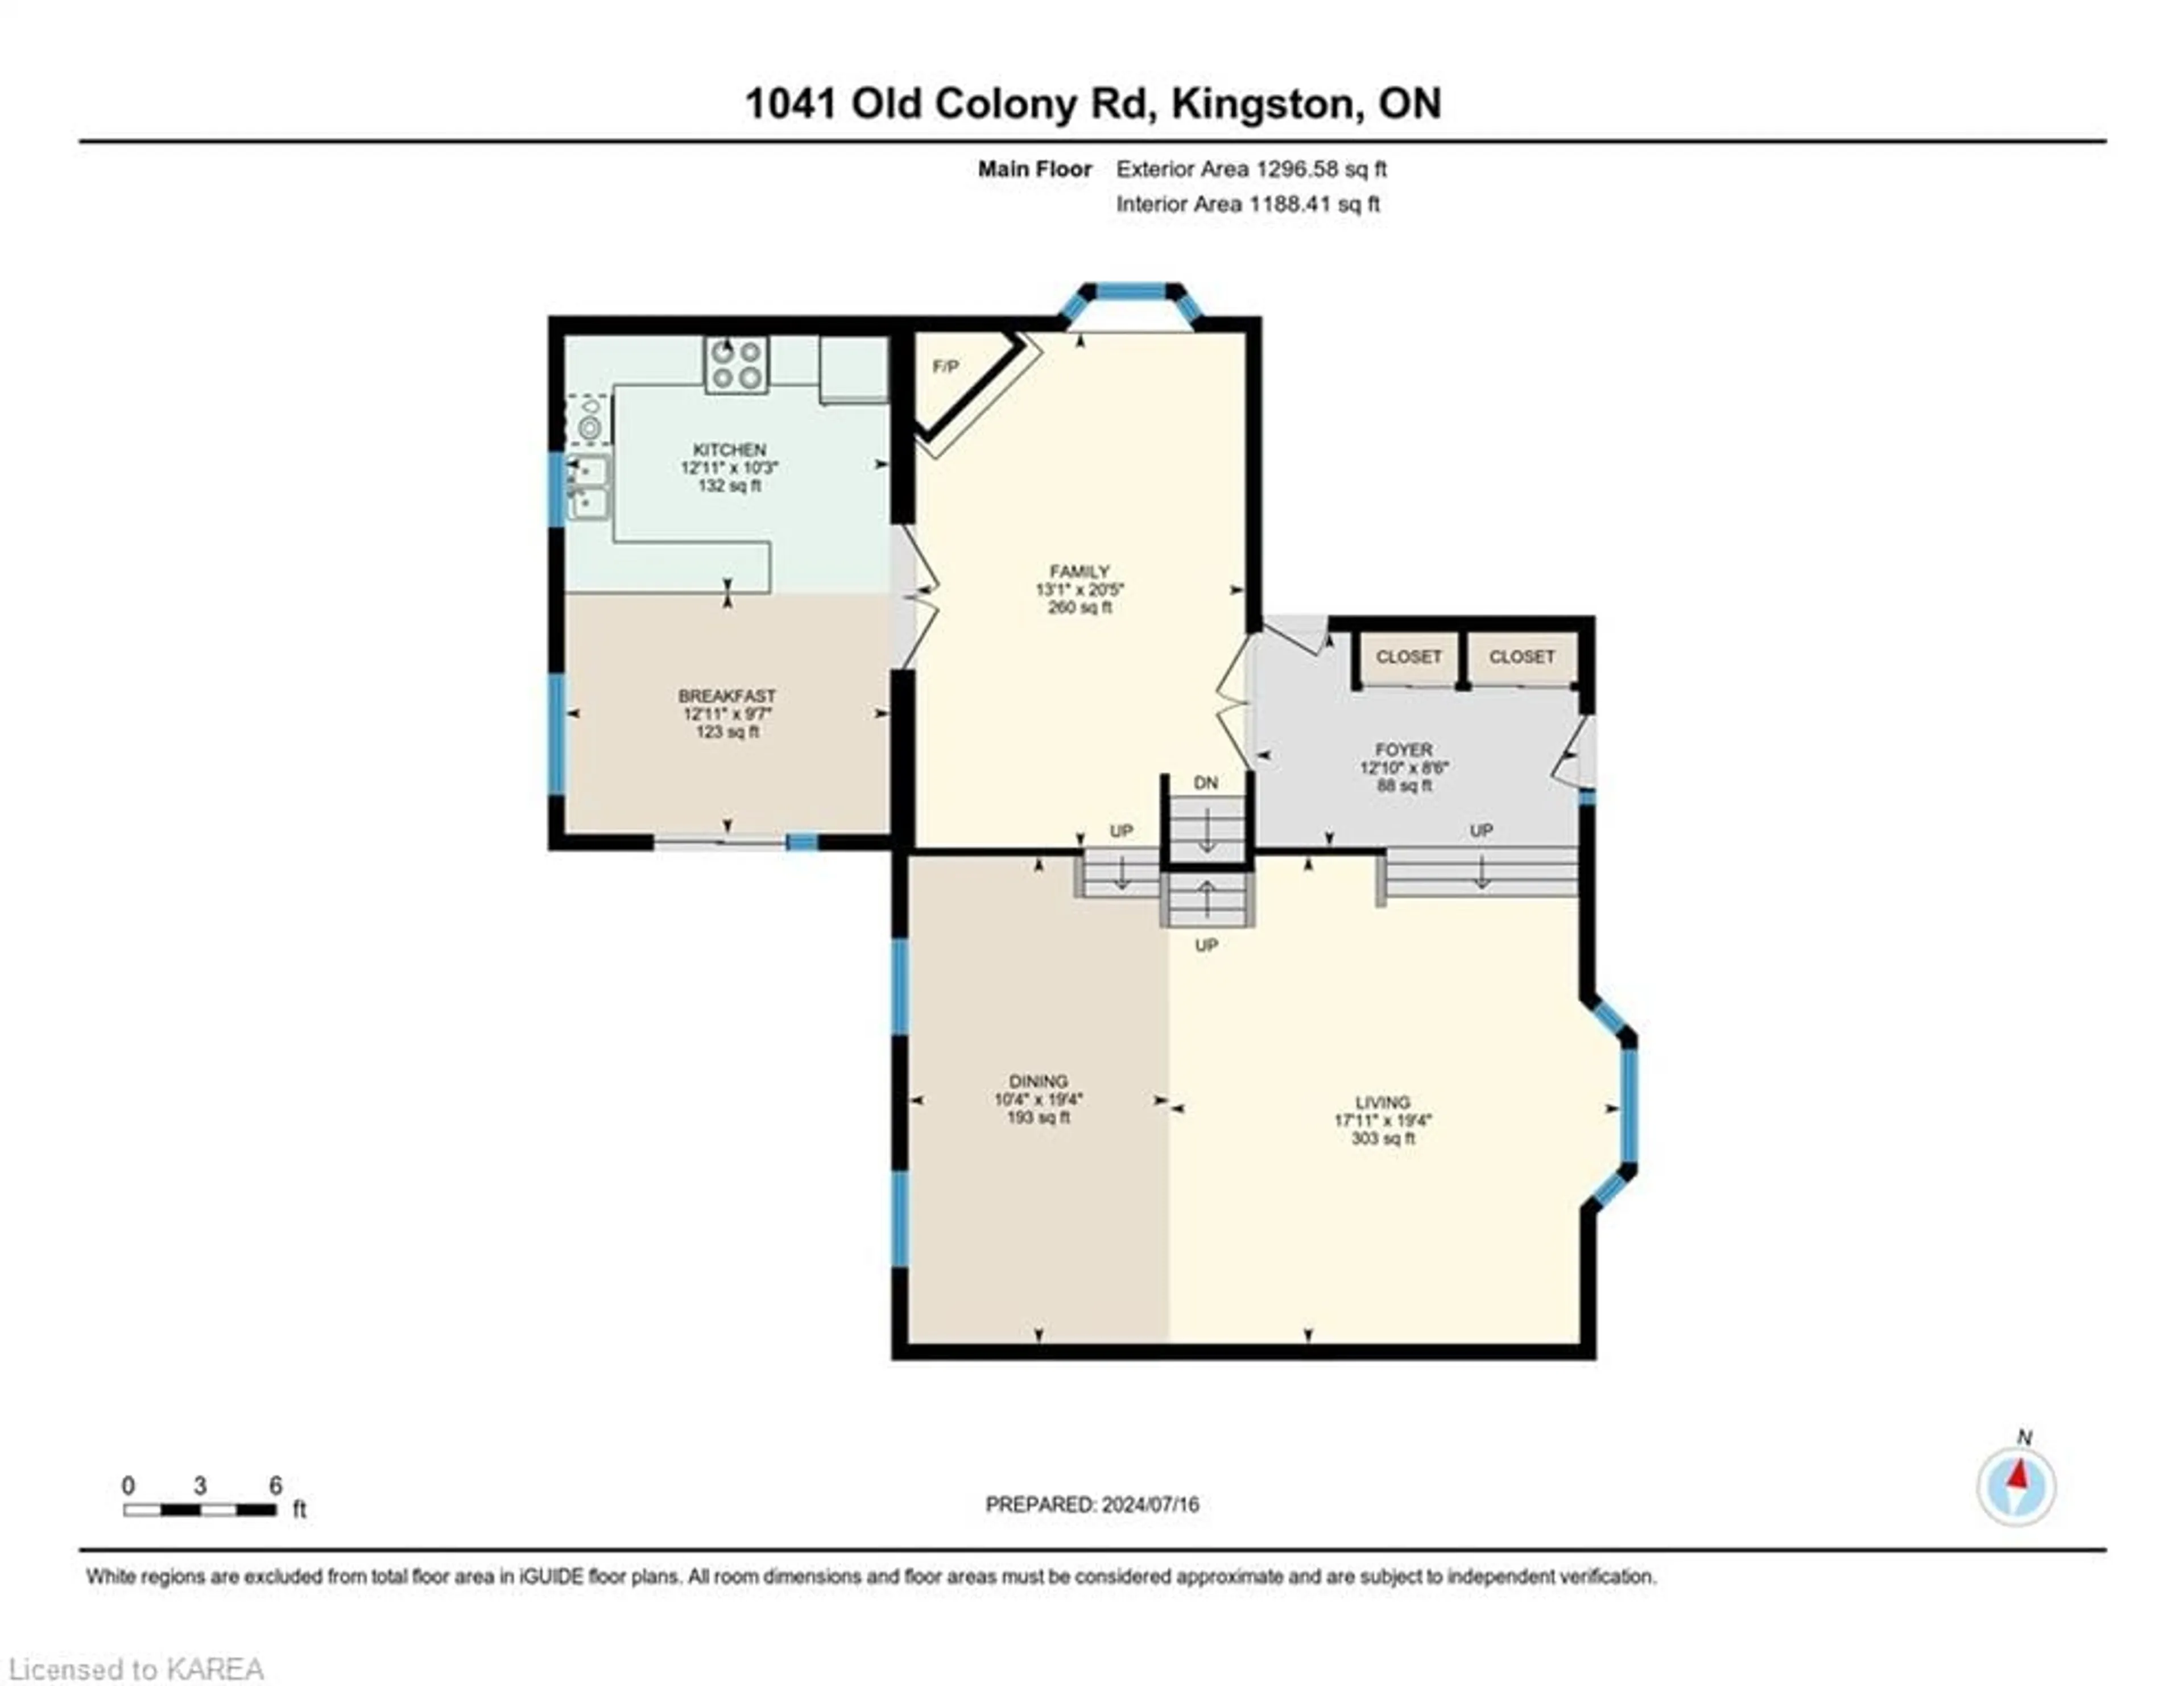 Floor plan for 1041 Old Colony Rd, Kingston Ontario K7P 1M3